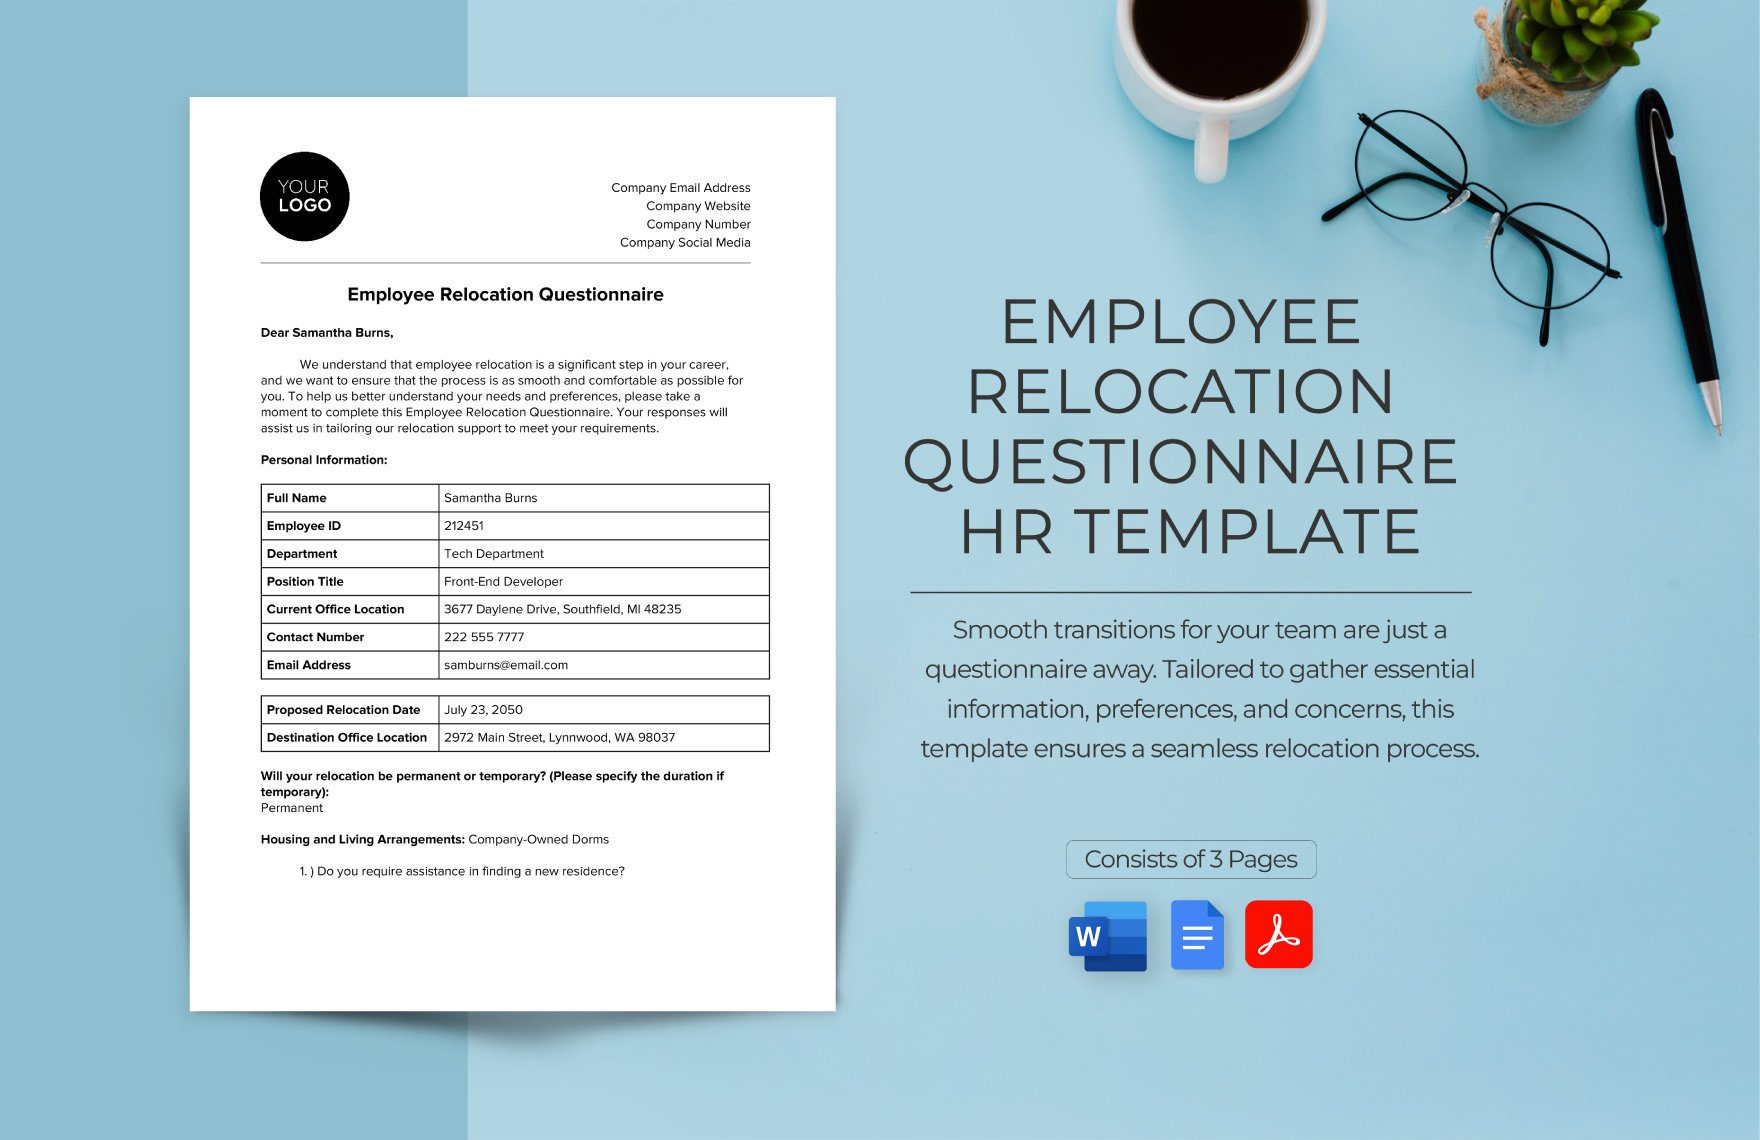 Employee Relocation Questionnaire HR Template in Word, Google Docs, PDF